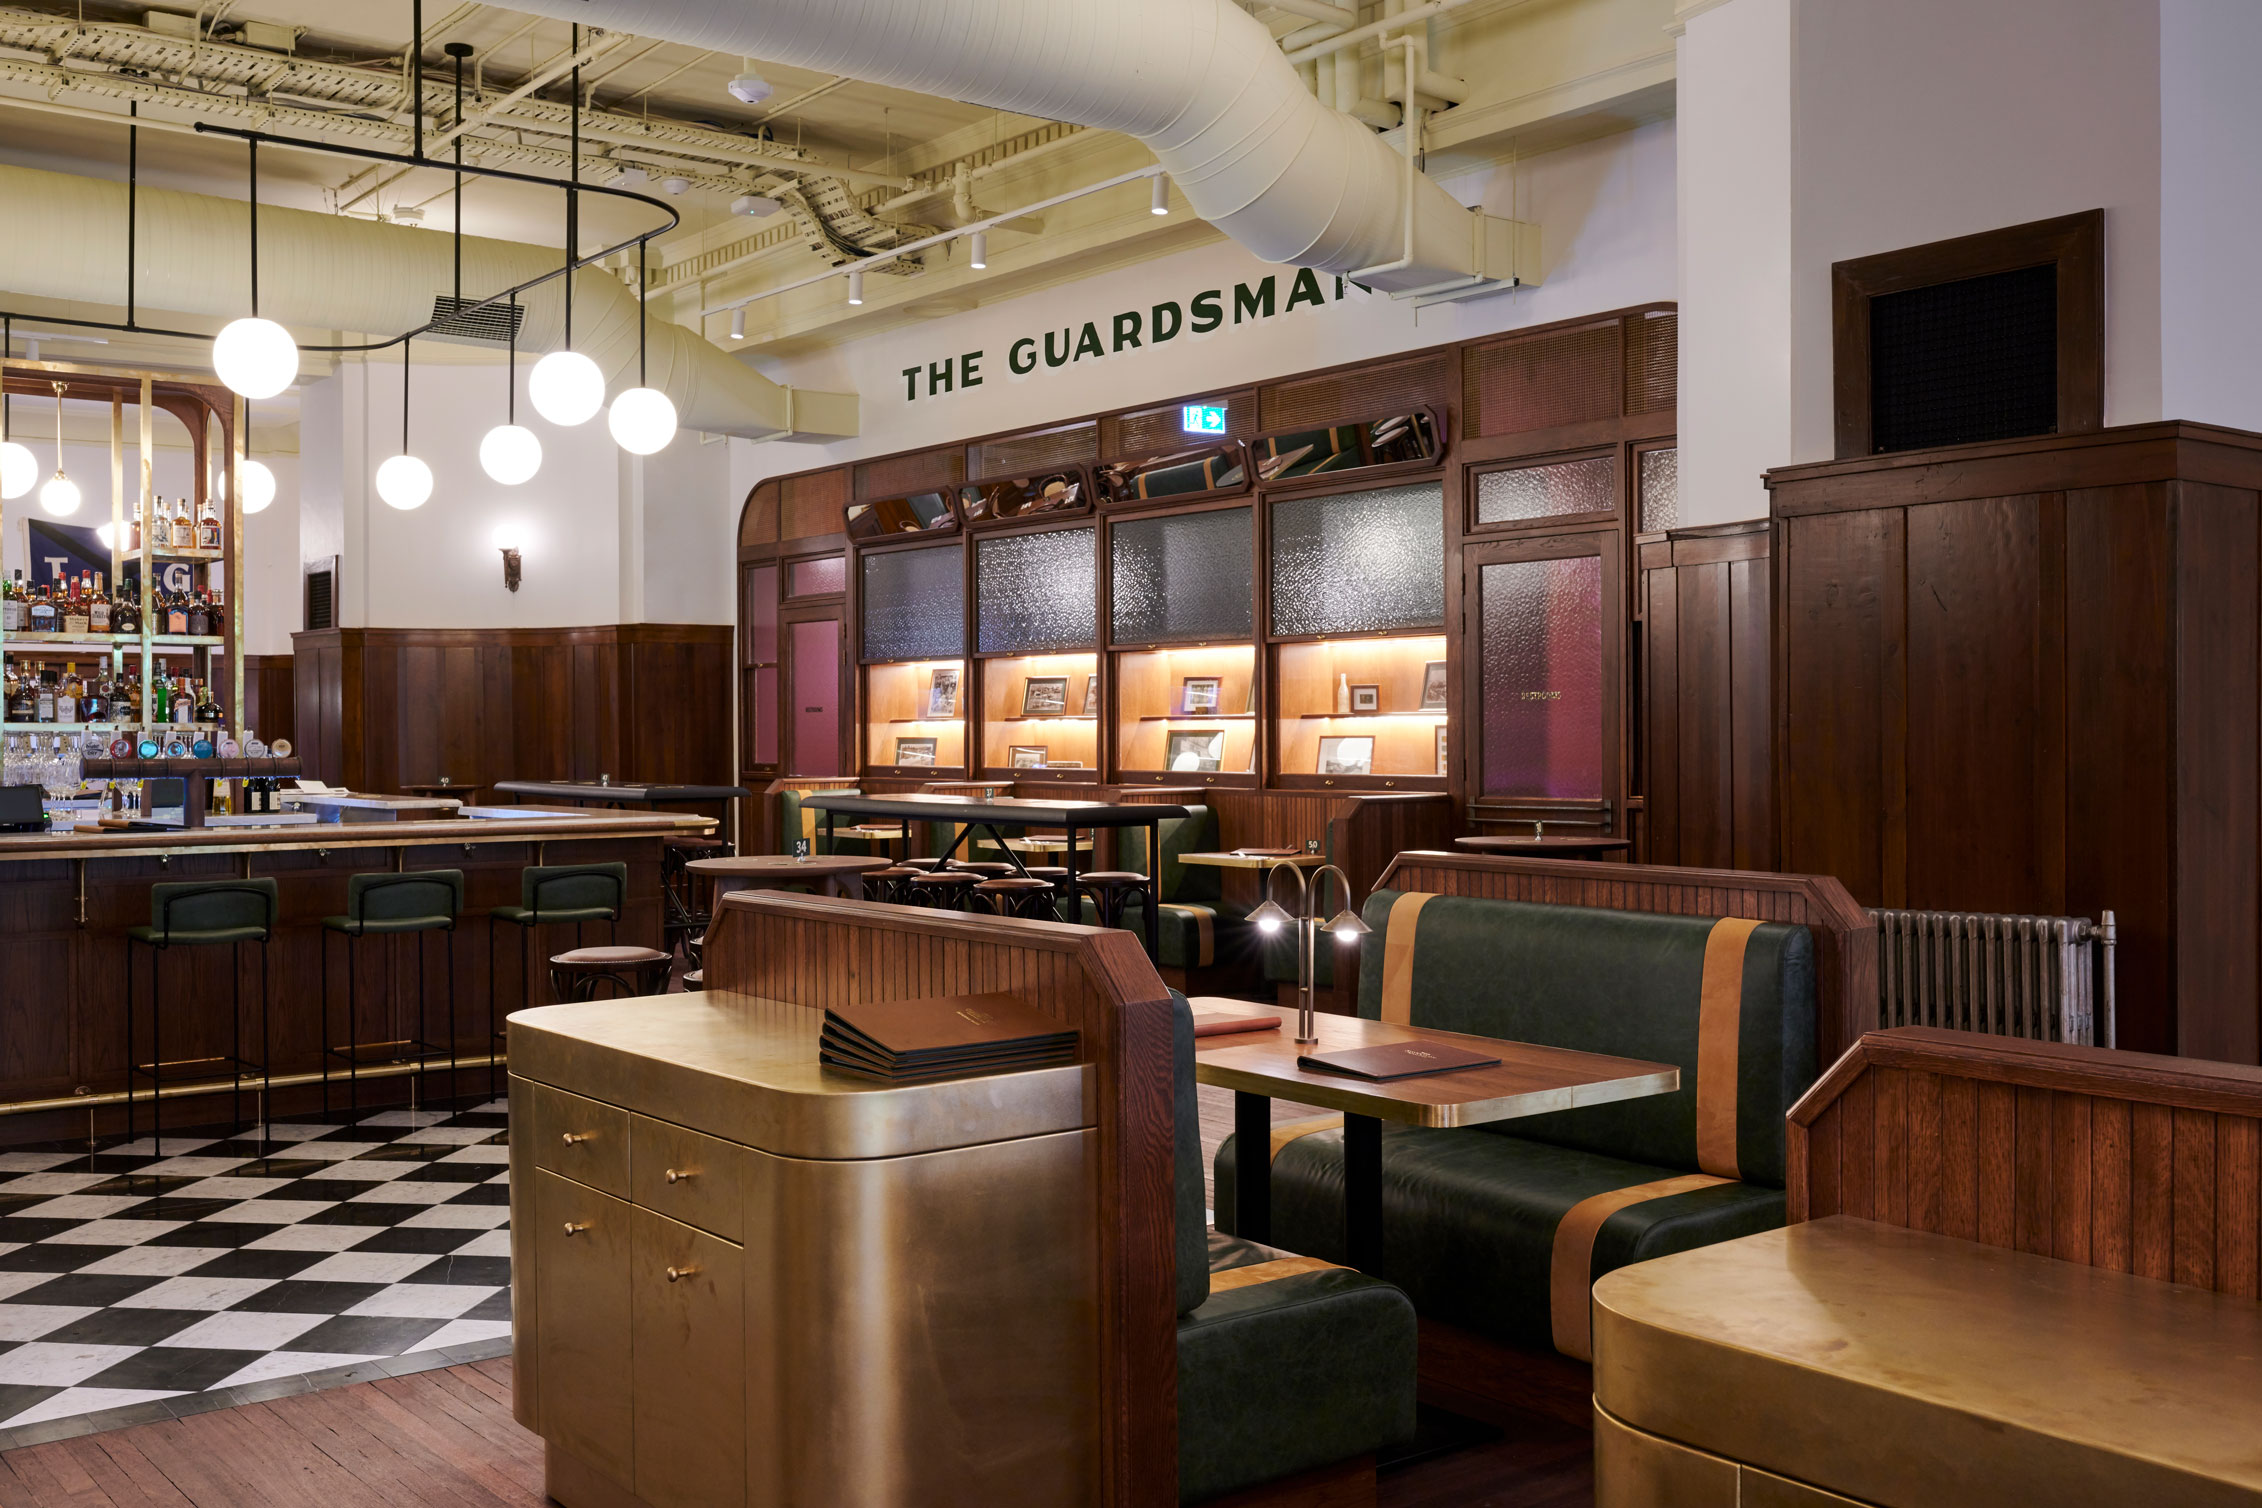 The Guardsman Adelaide Railway by studio gram. Photography by Kate Bowman.